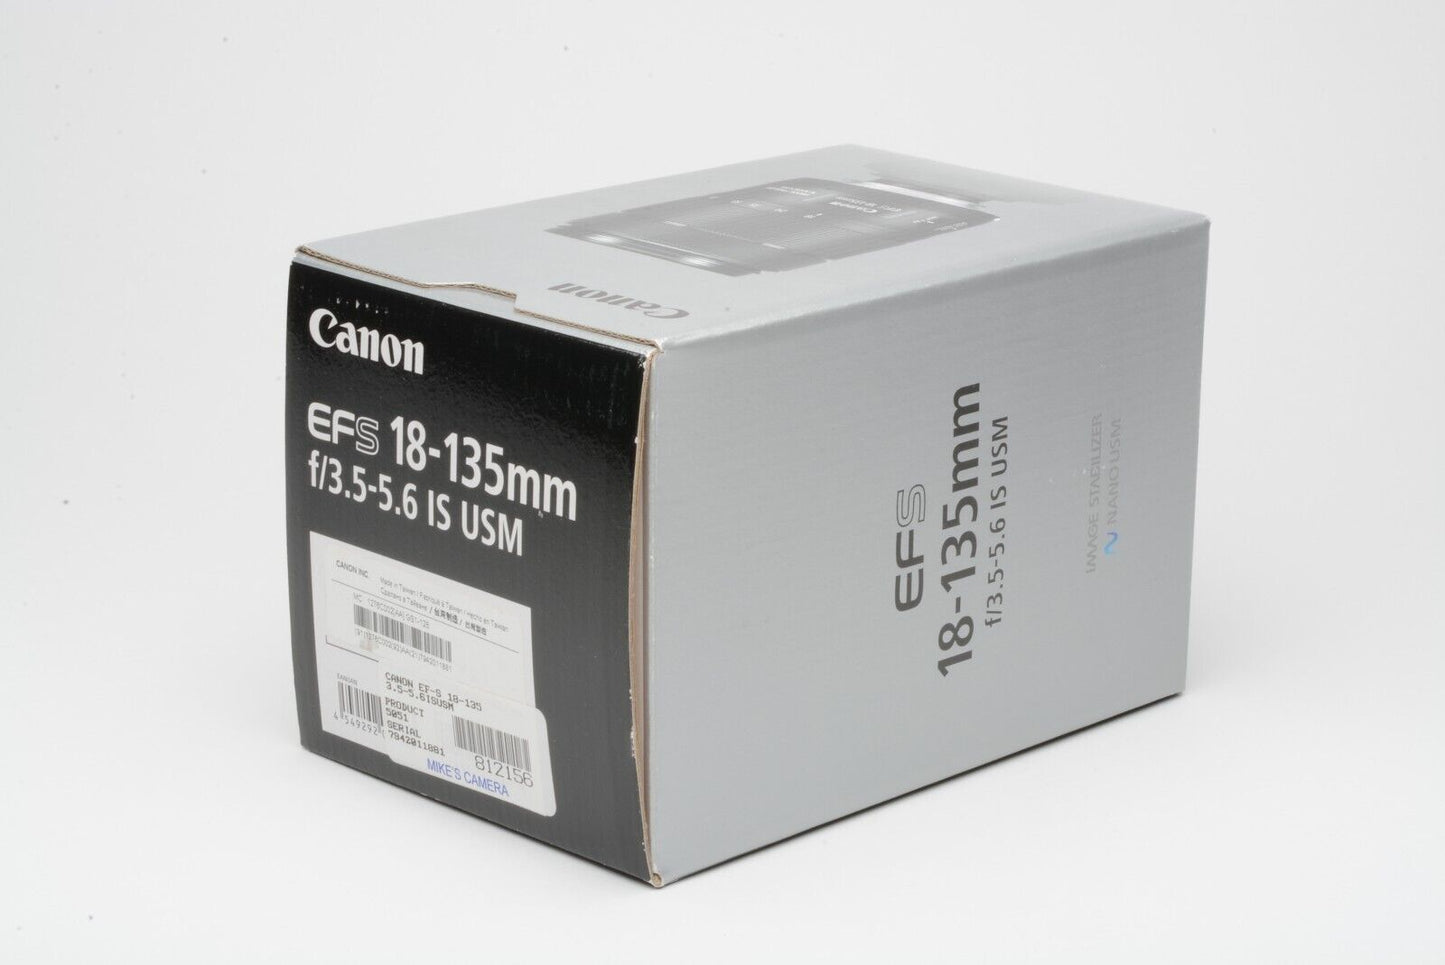 MINT CANON USA EFS 18-135mm f3.5-5.6 IS USM ZOOM LENS, BARELY USED, BOXED +UV